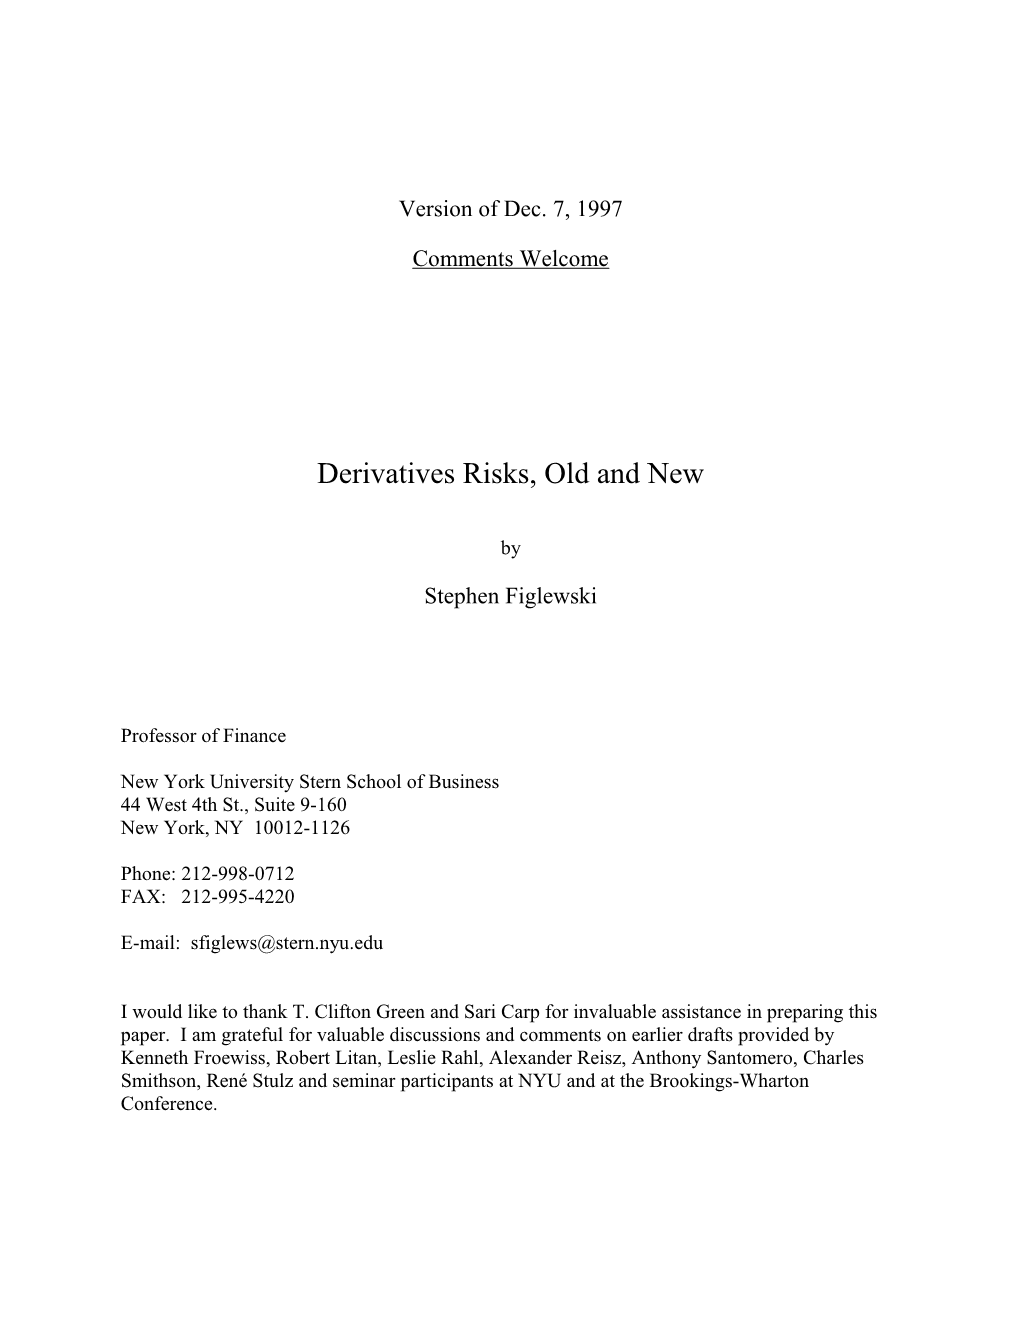 Derivatives Risks, Old and New